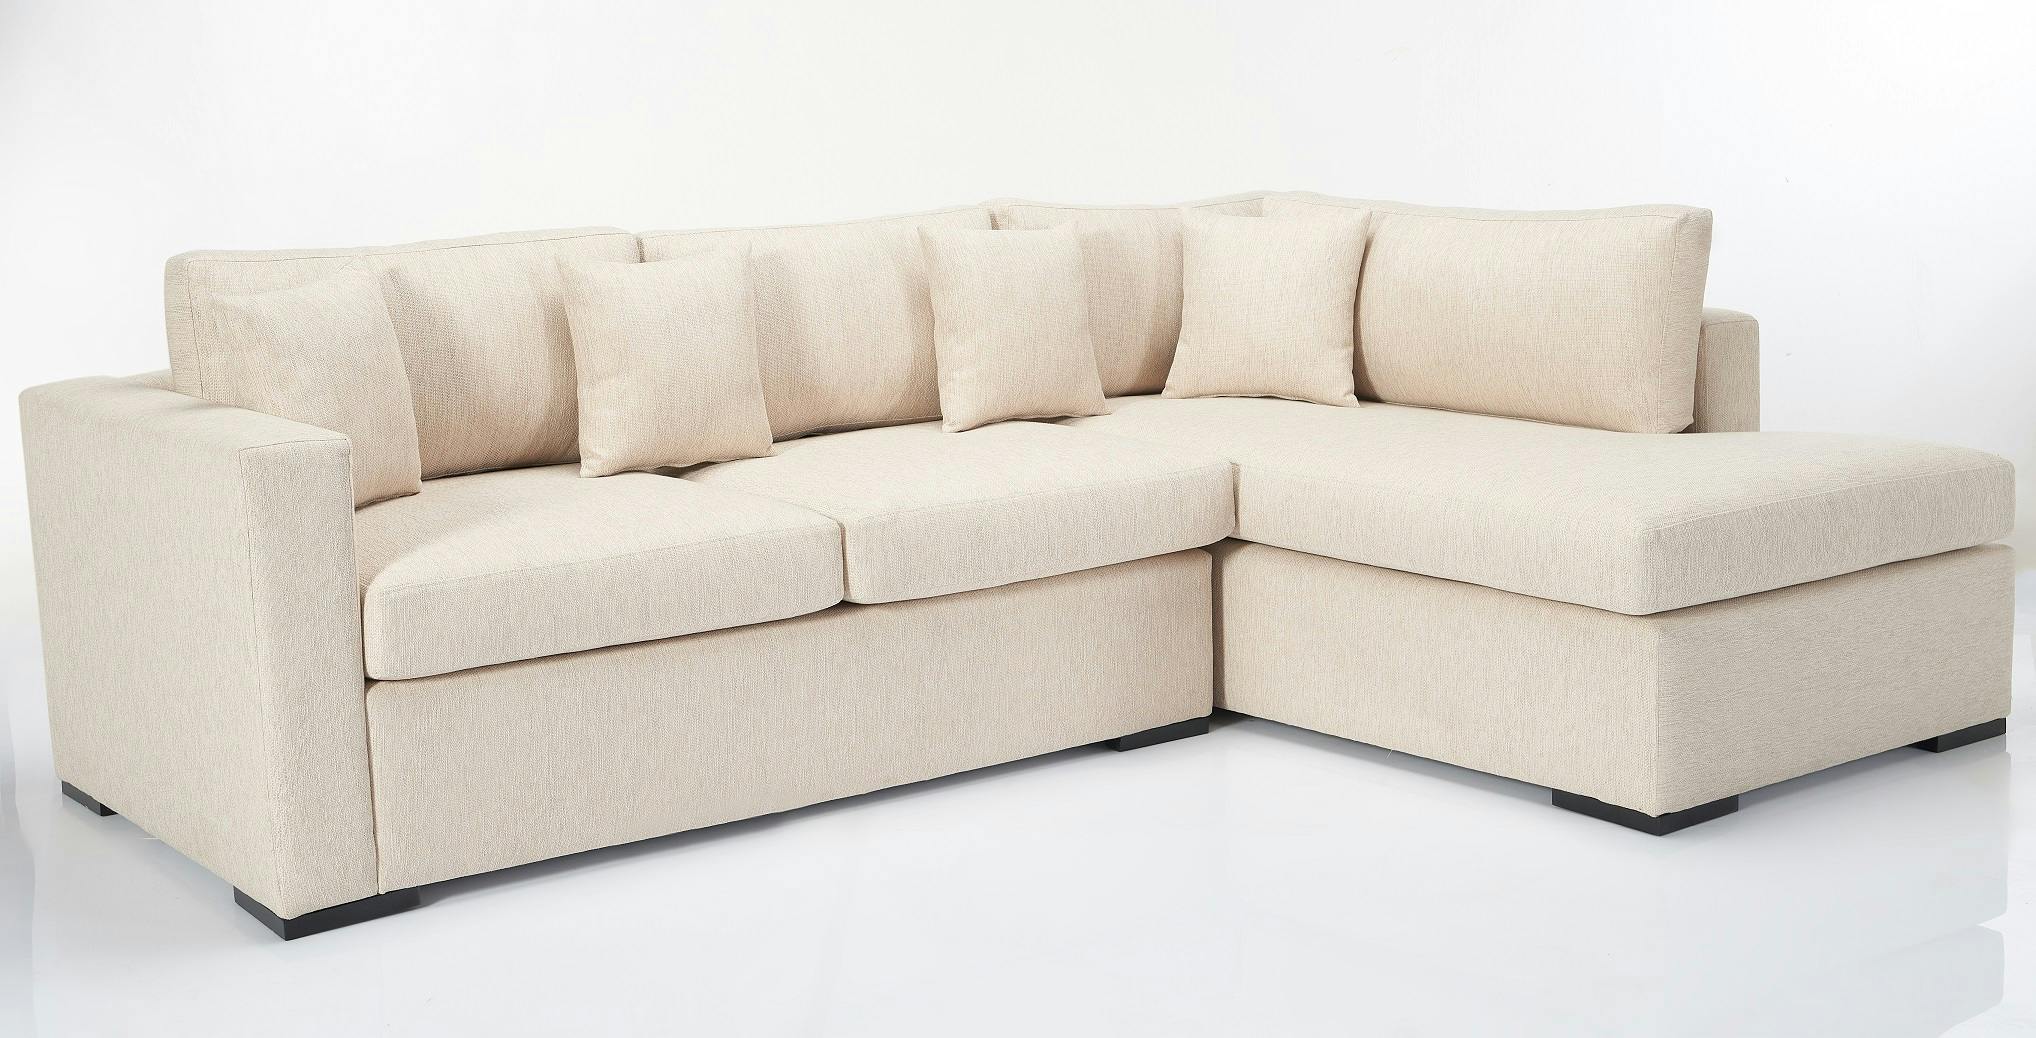 L-shaped couch 0